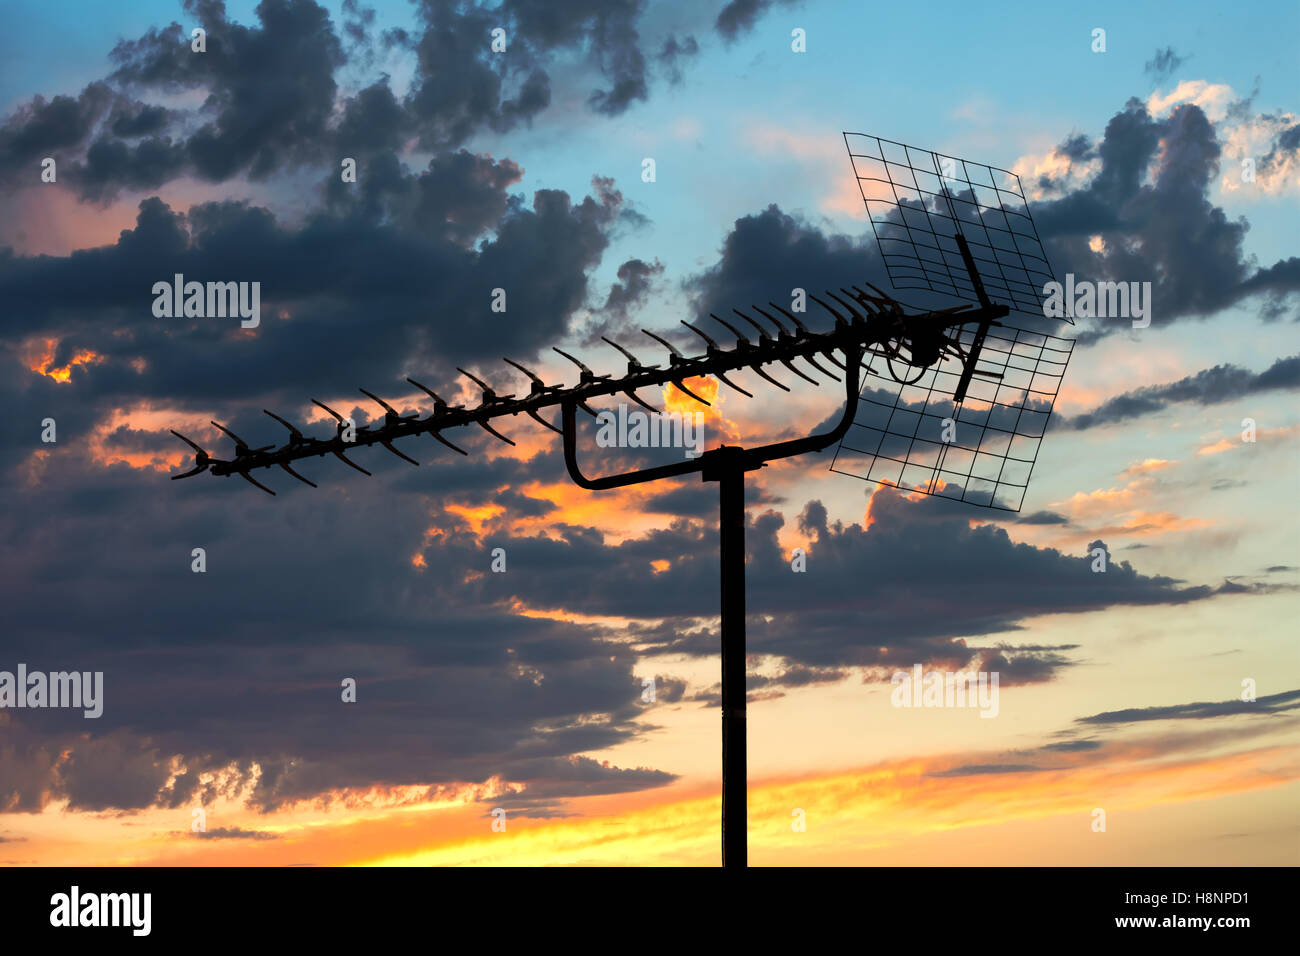 old TV antenna silhouette on evening blue cloudy sky background Stock Photo